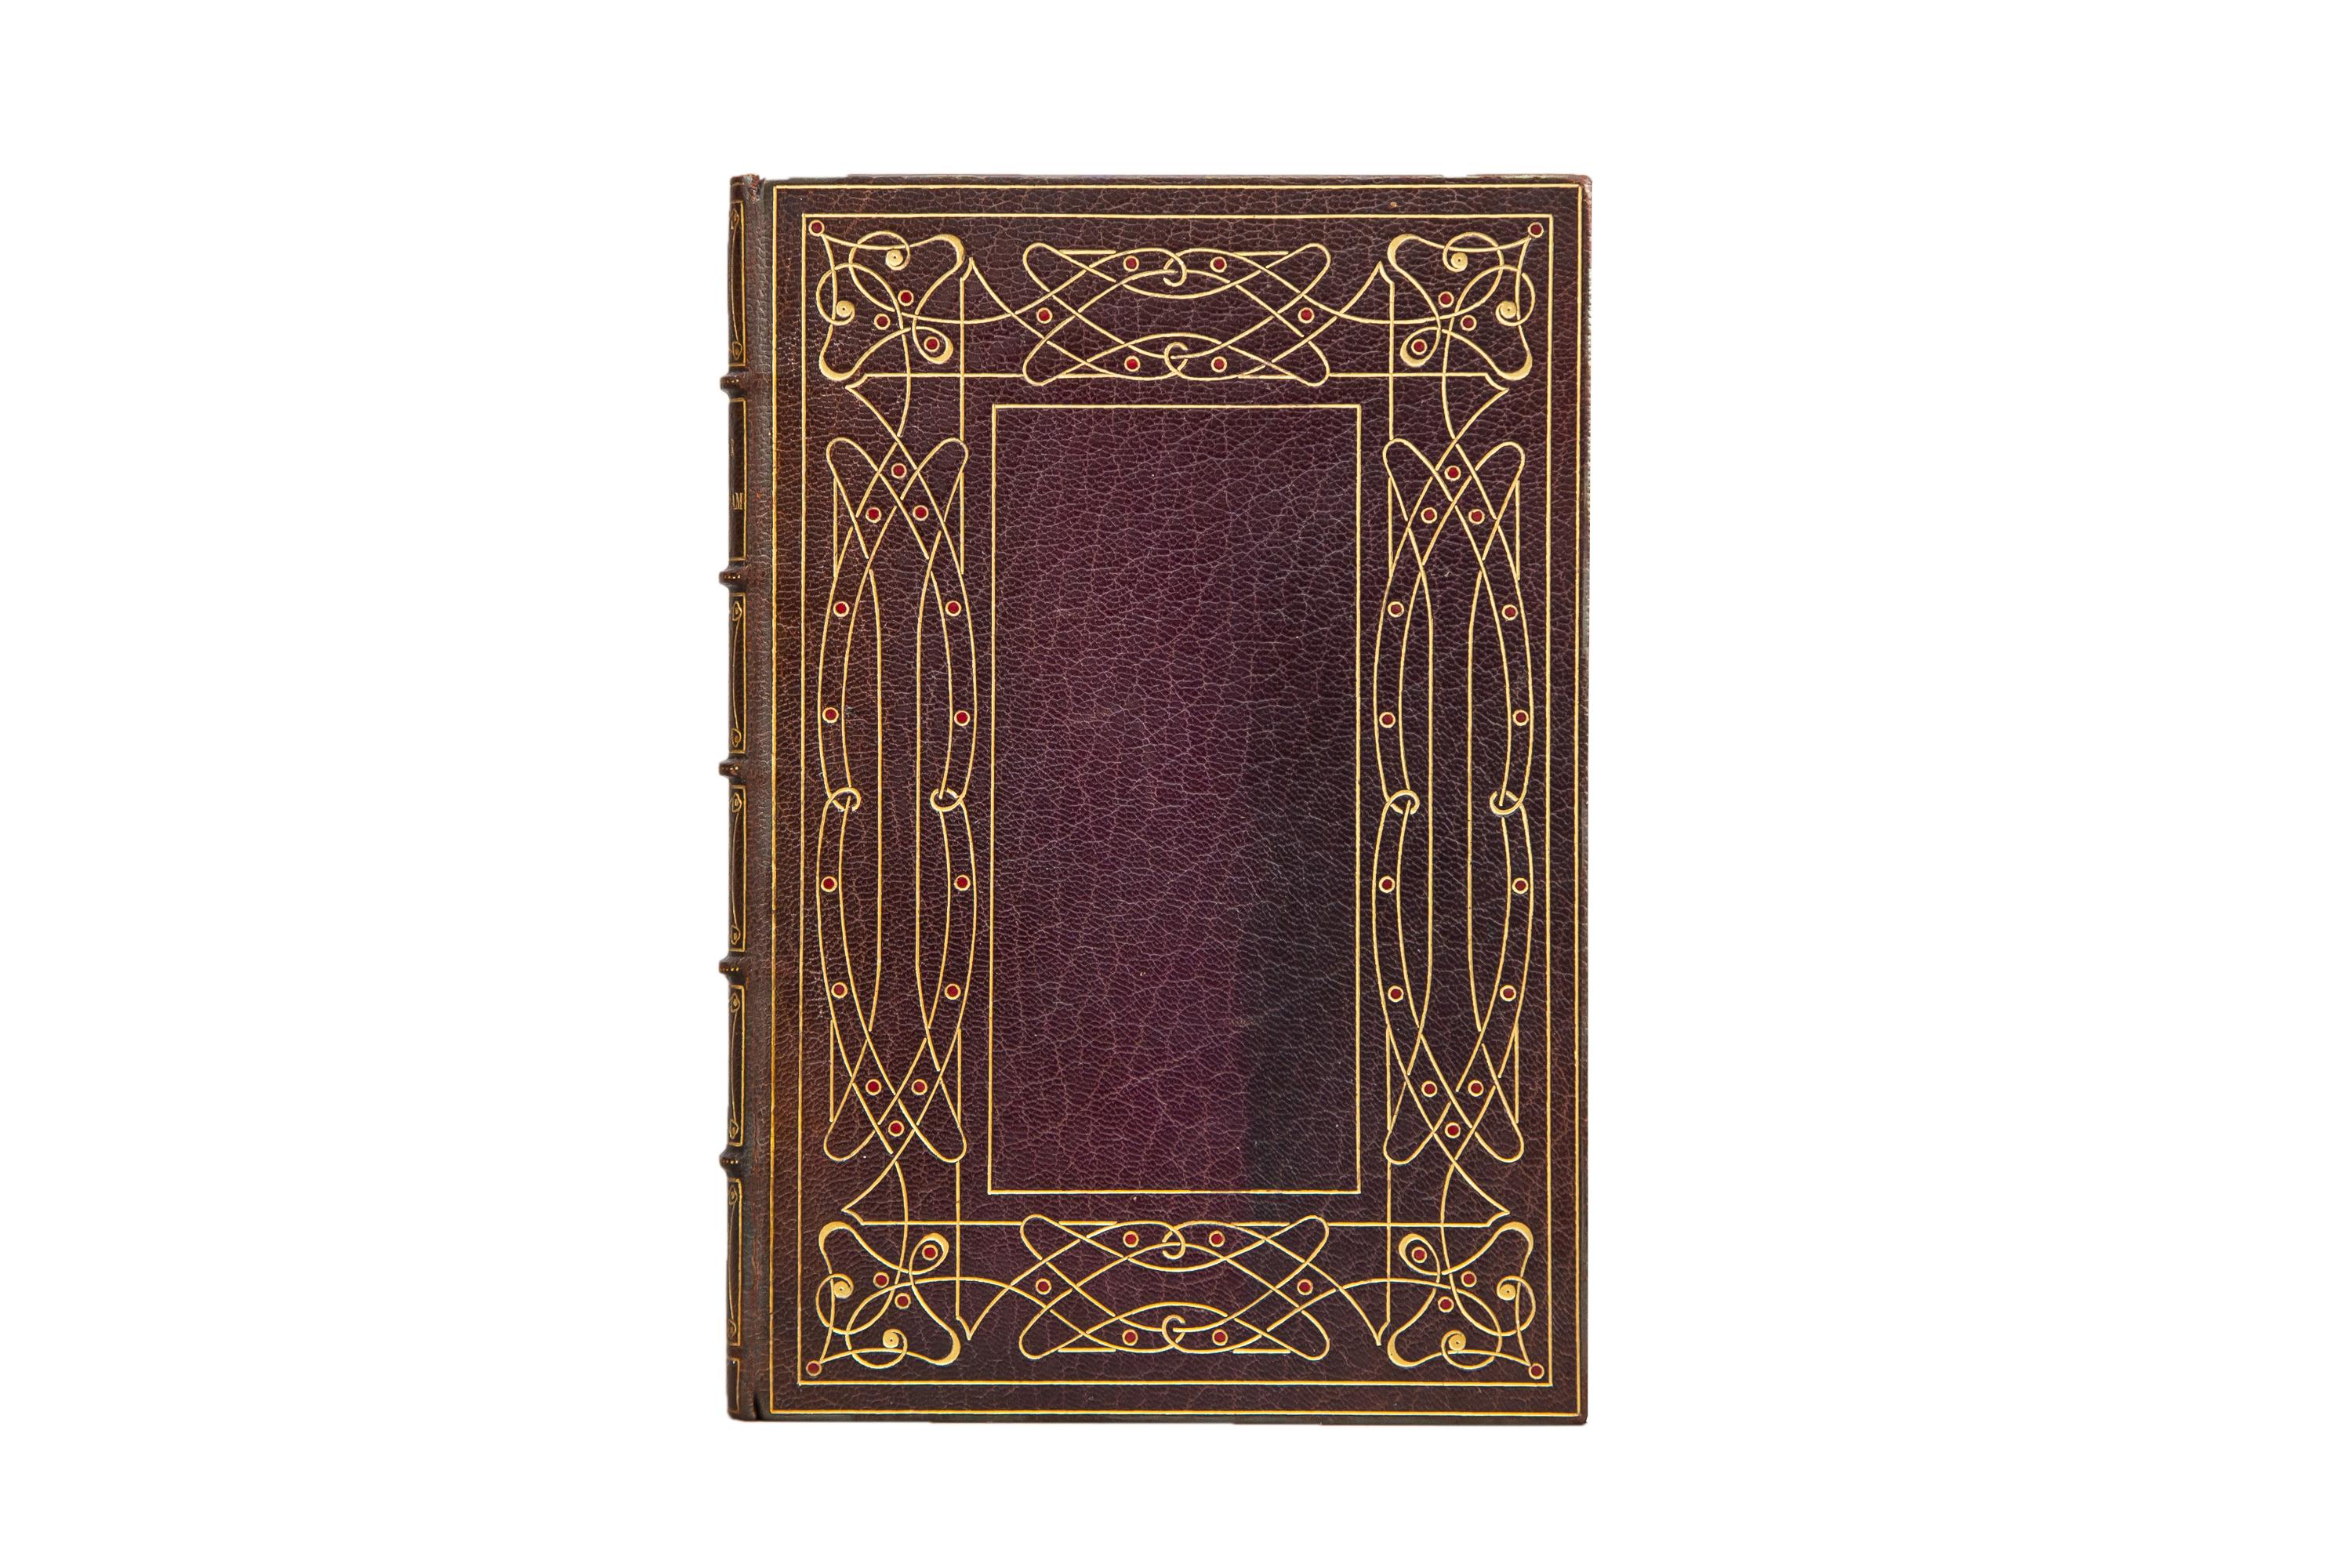 1 Volume. Edward Fitzgerald, Rubáiyát of Omar Khayyám. Bound in full purple morocco. The front cover displays gilt detailing and small dotted details in red morocco. Raised band spine gilt with gilt bordered panels and title. All edges are gilt with